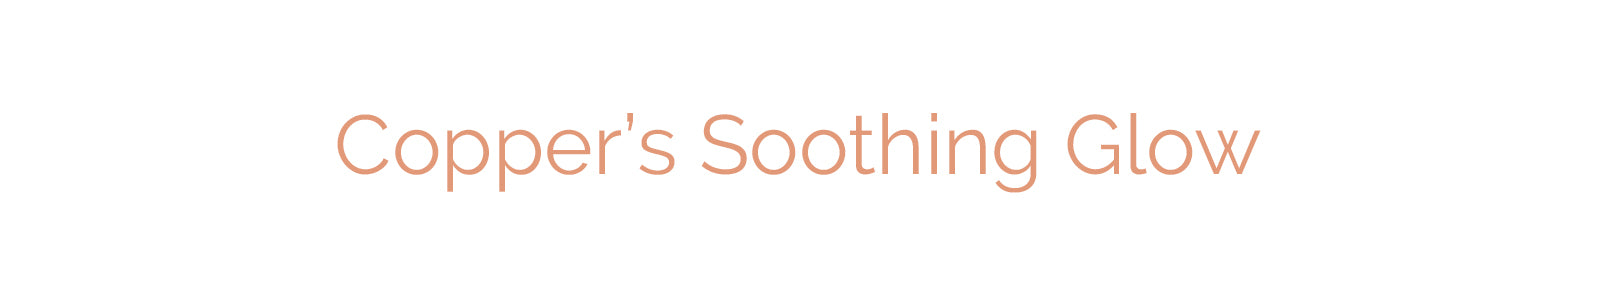 Copper's Soothing Glow-Copper Health and Wellness-Copper and Spas-Copper and the Home